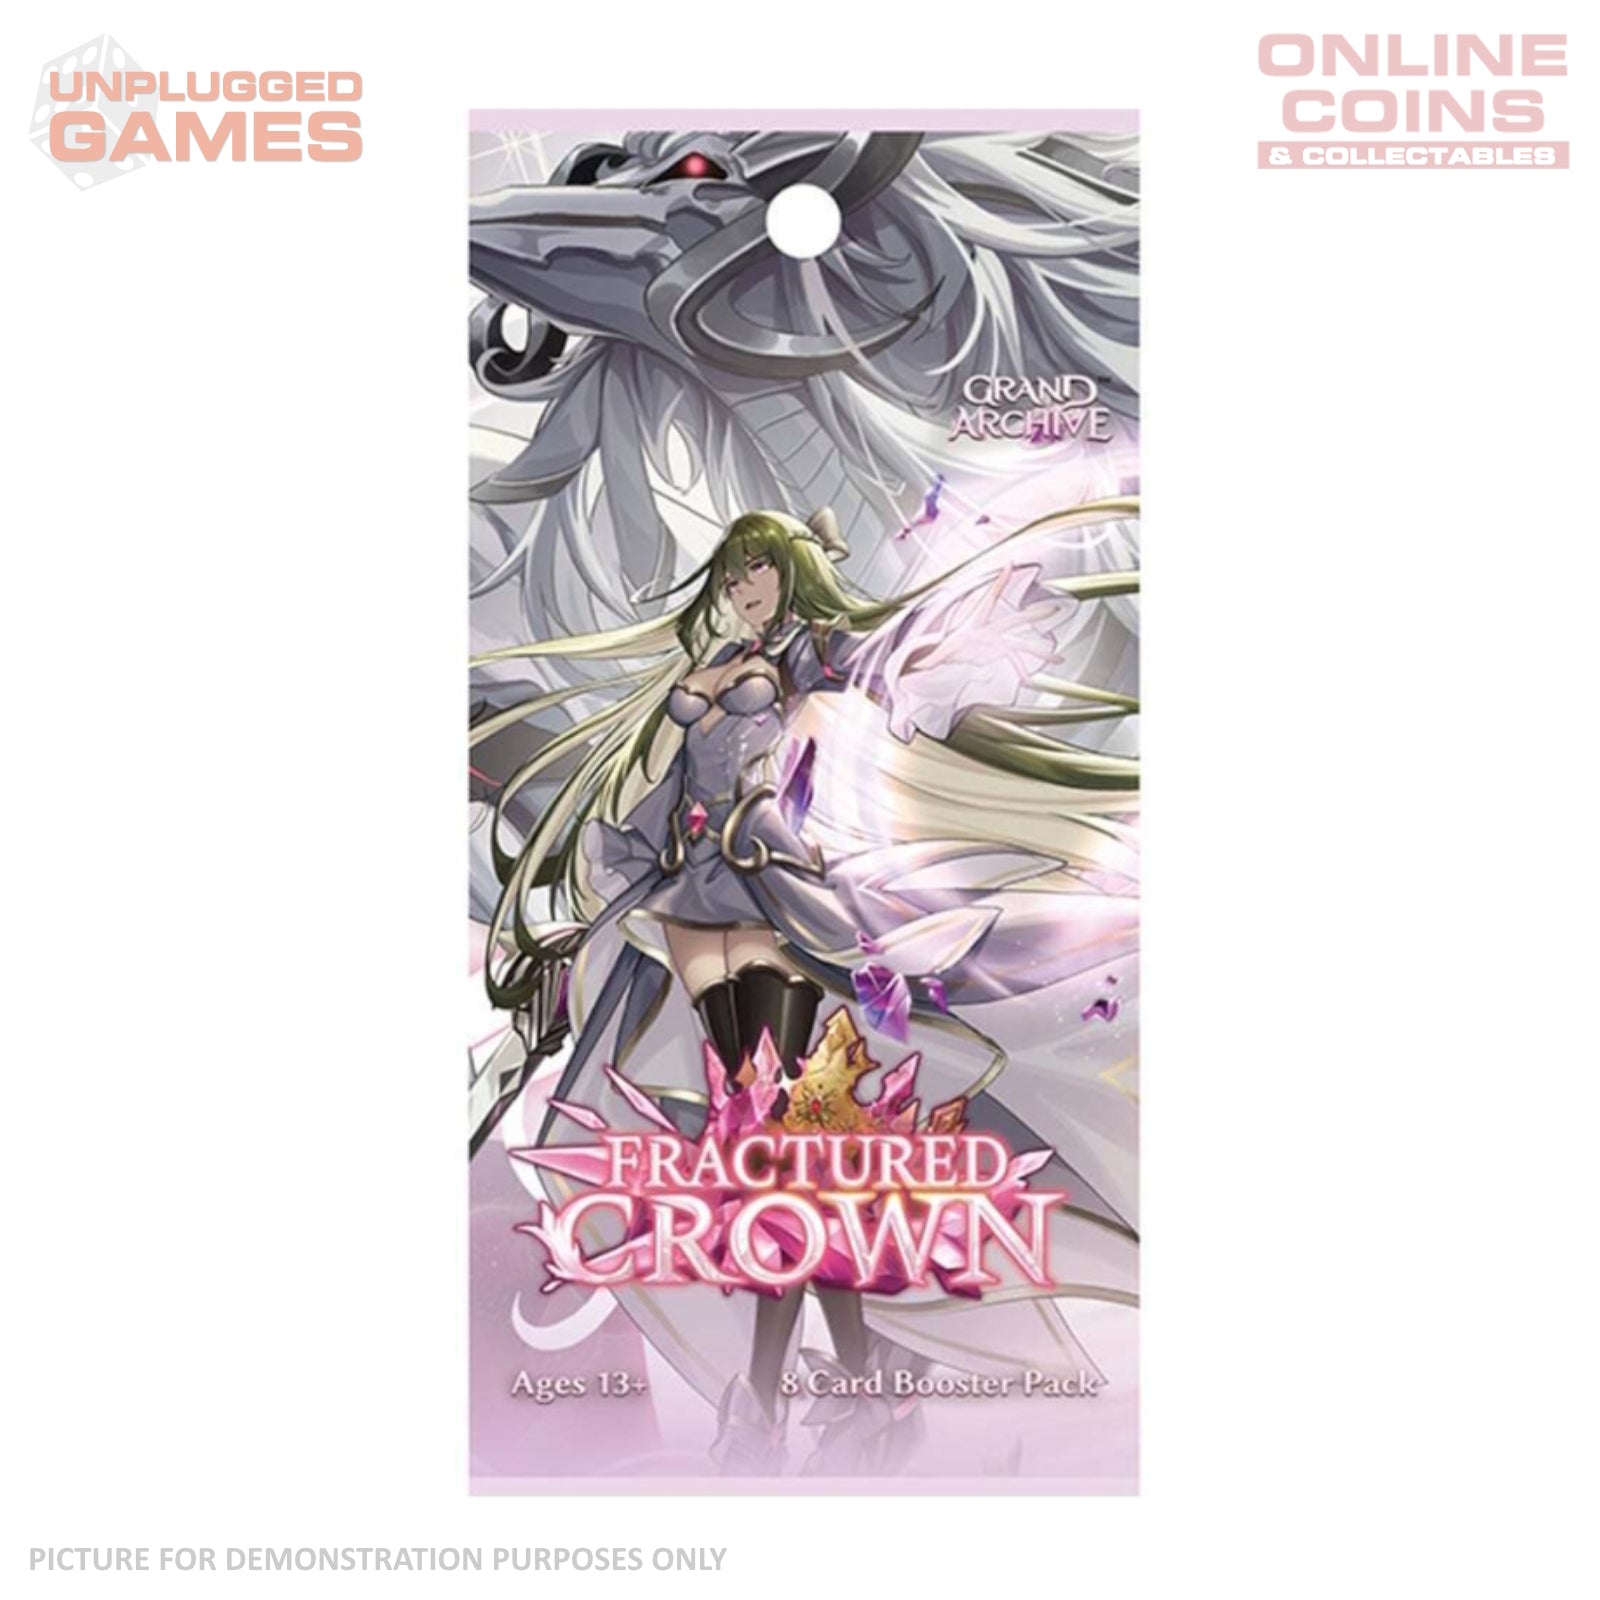 Grand Archive TCG Fractured Crown - Booster Pack